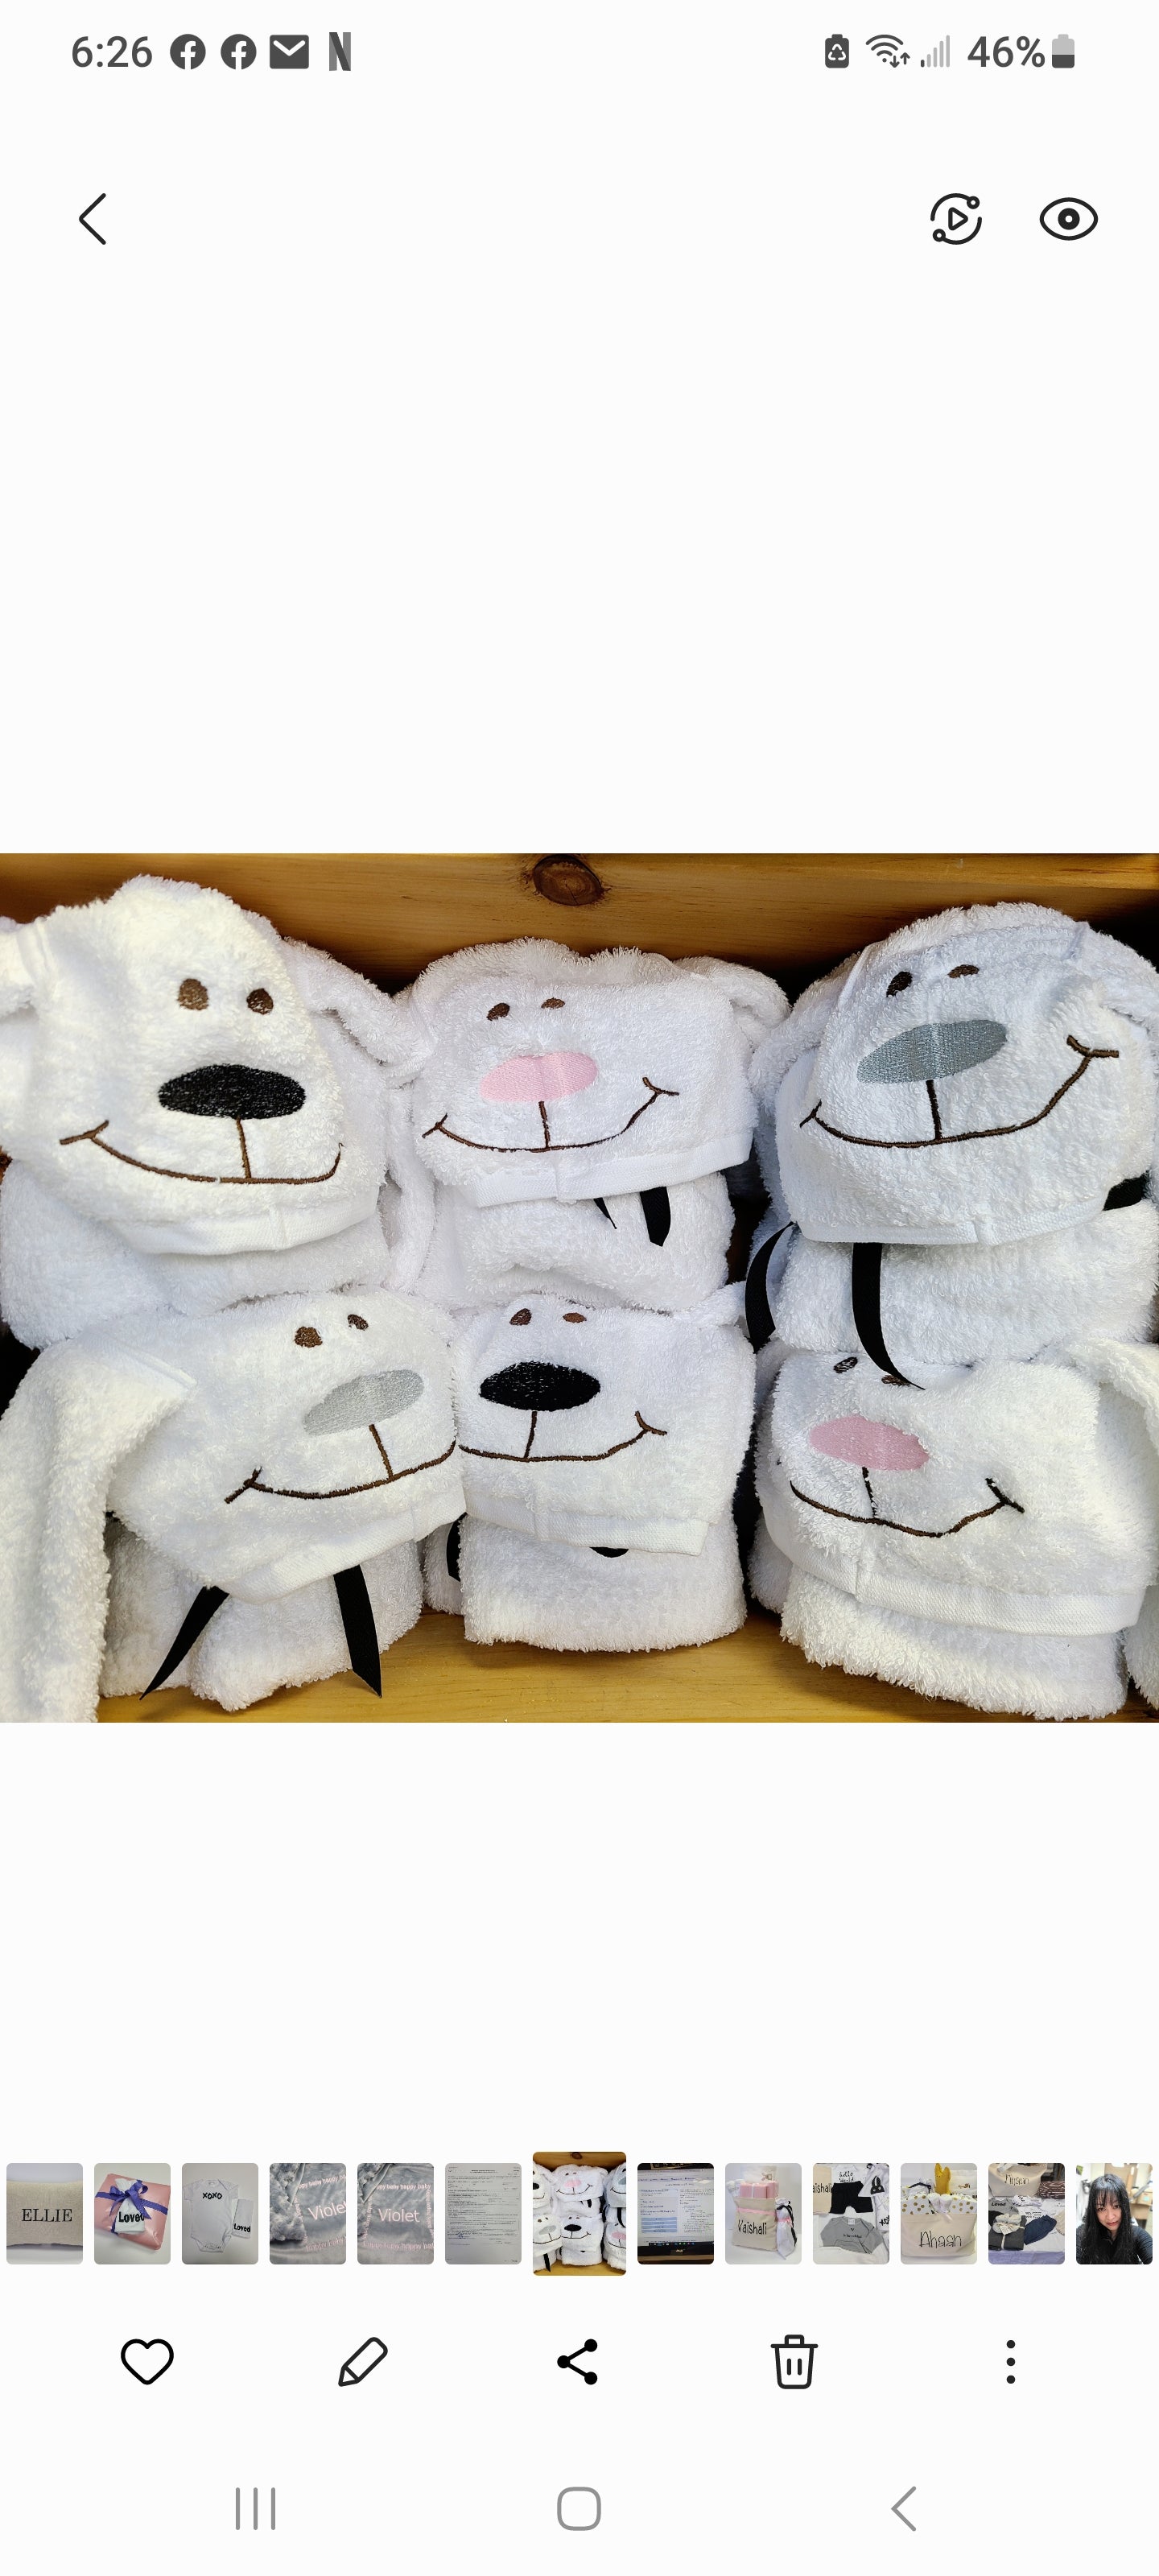 Puppy Hooded Towel